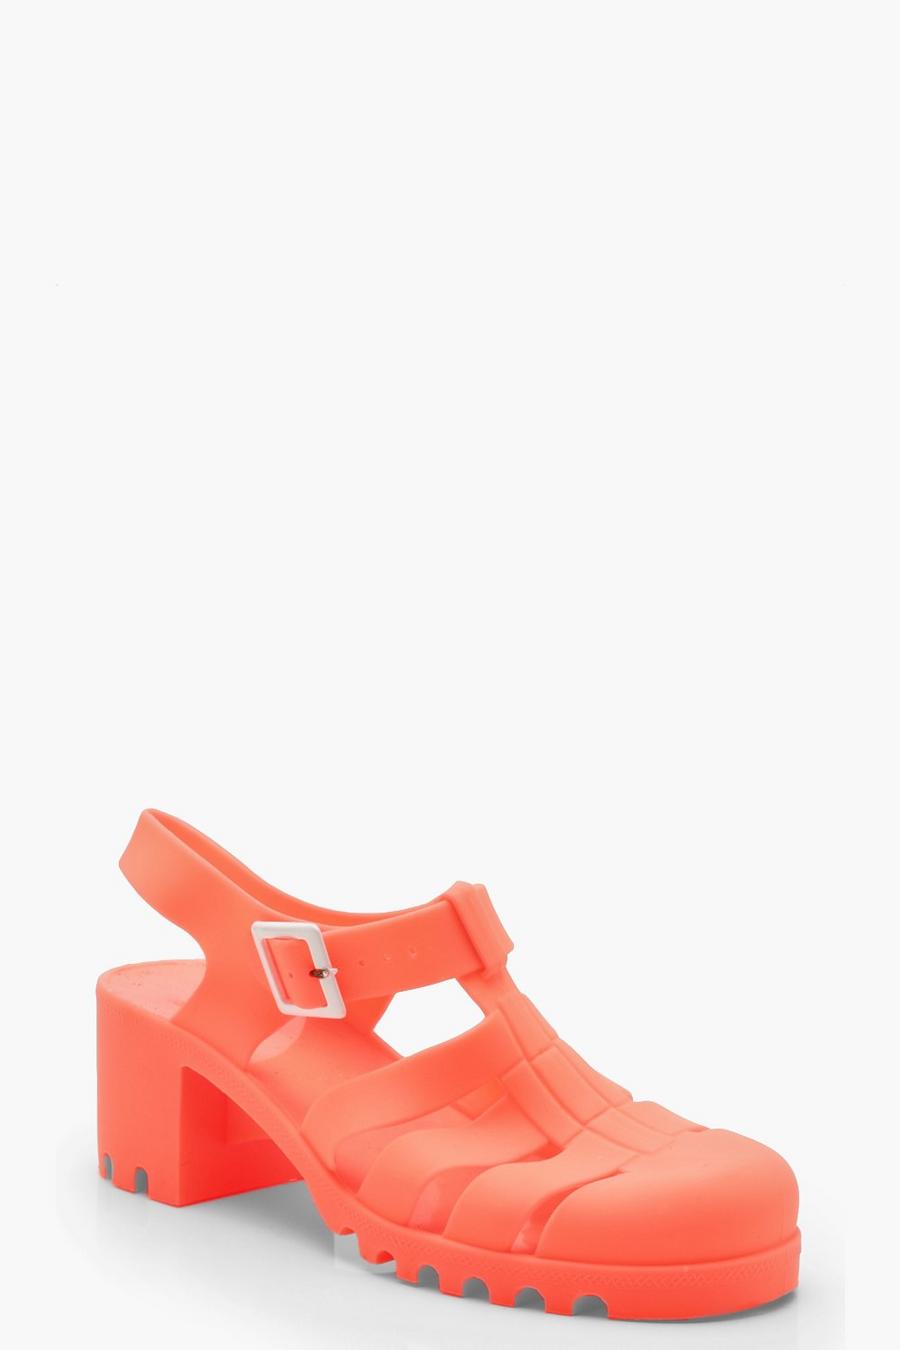 Coral pink Block Heel Jelly Shoes